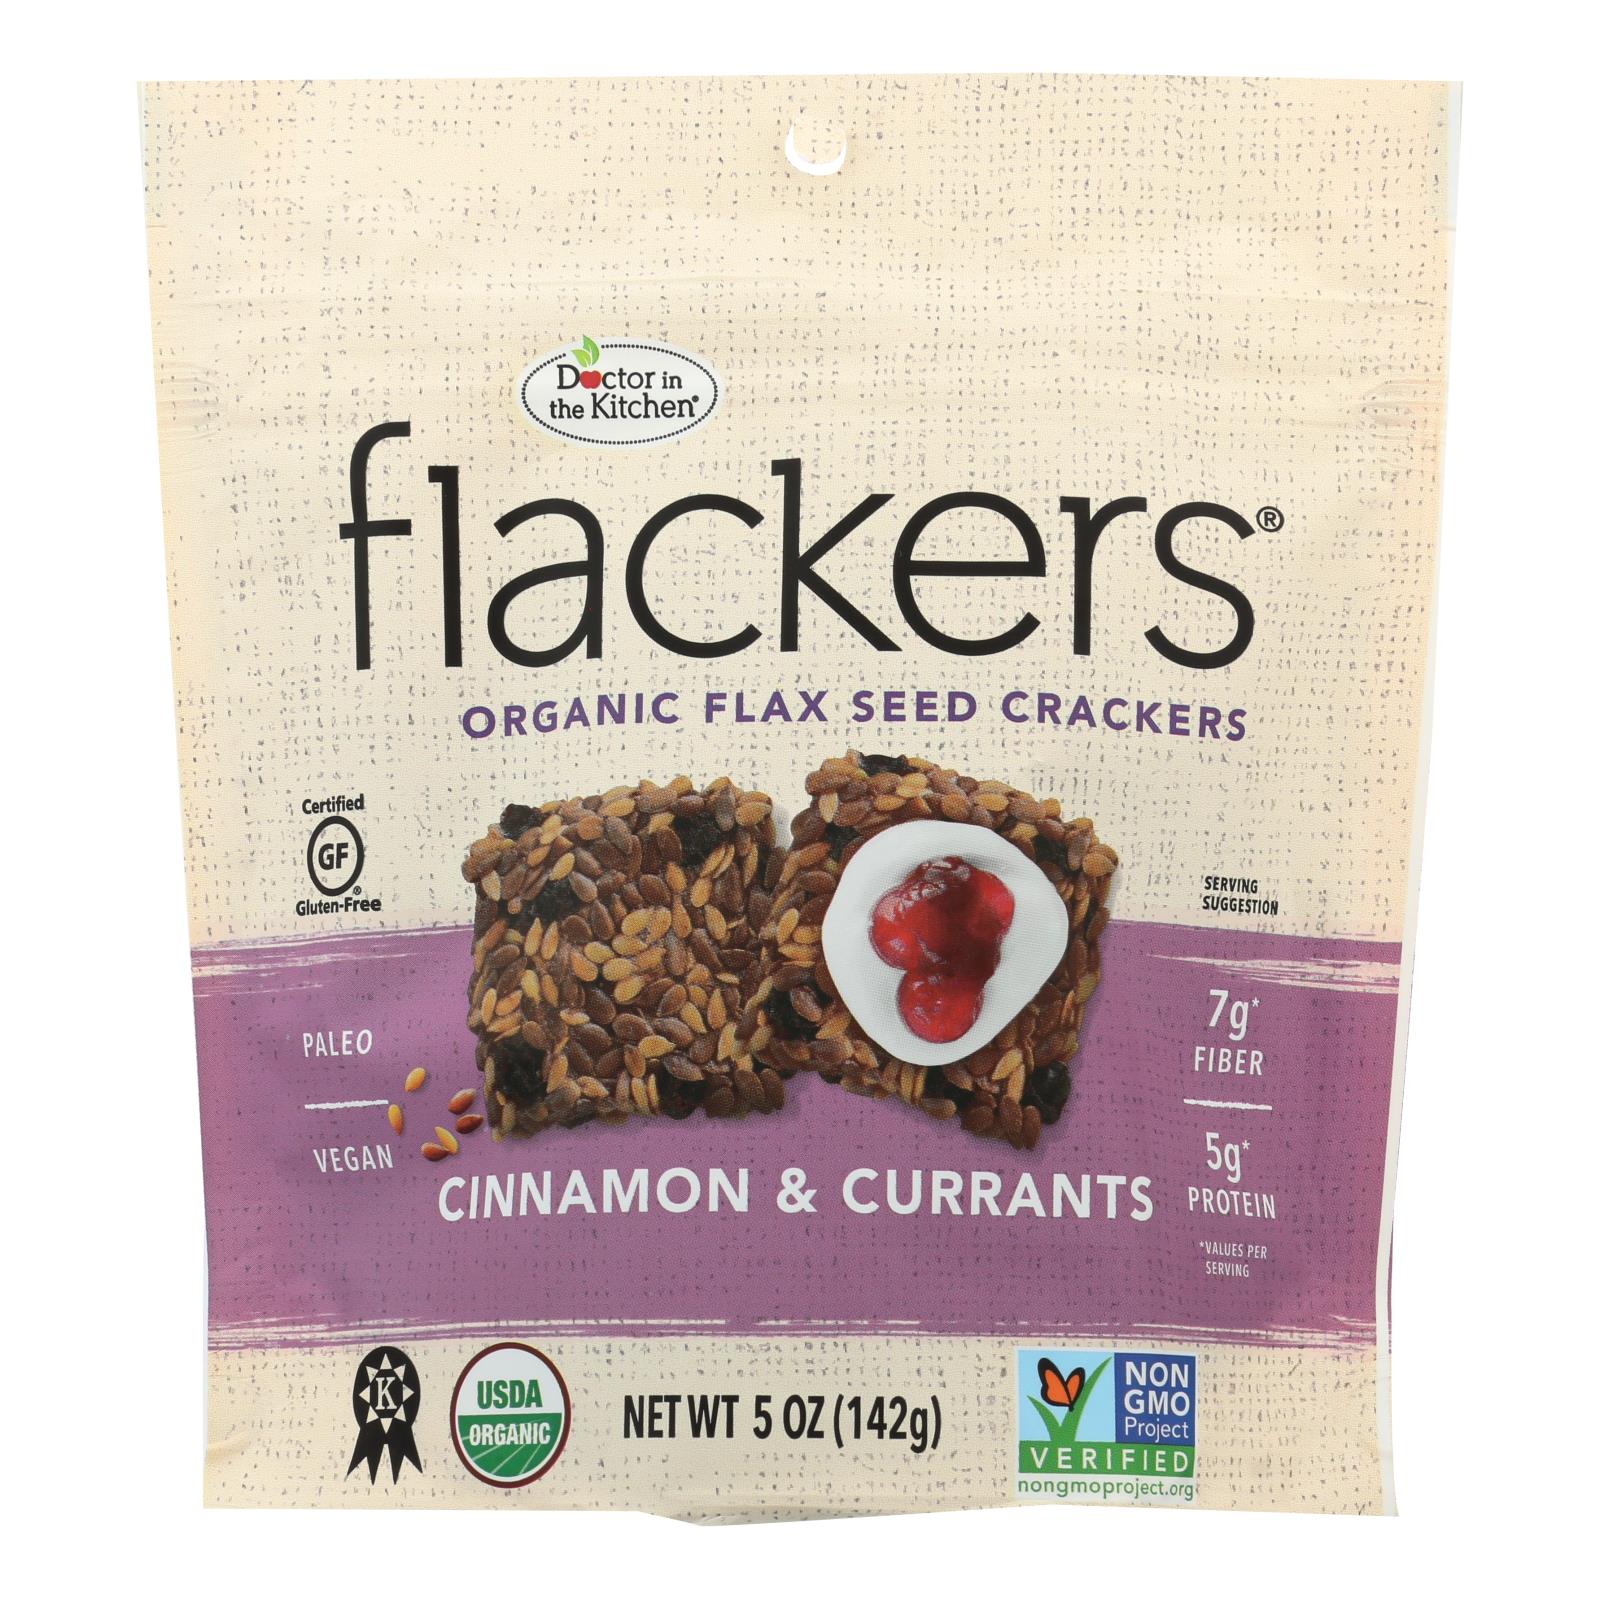 Doctor In The Kitchen - Organic Flax Seed Crackers - Cinnamon And Currants - Case Of 6 - 5 Oz. - Whole Green Foods